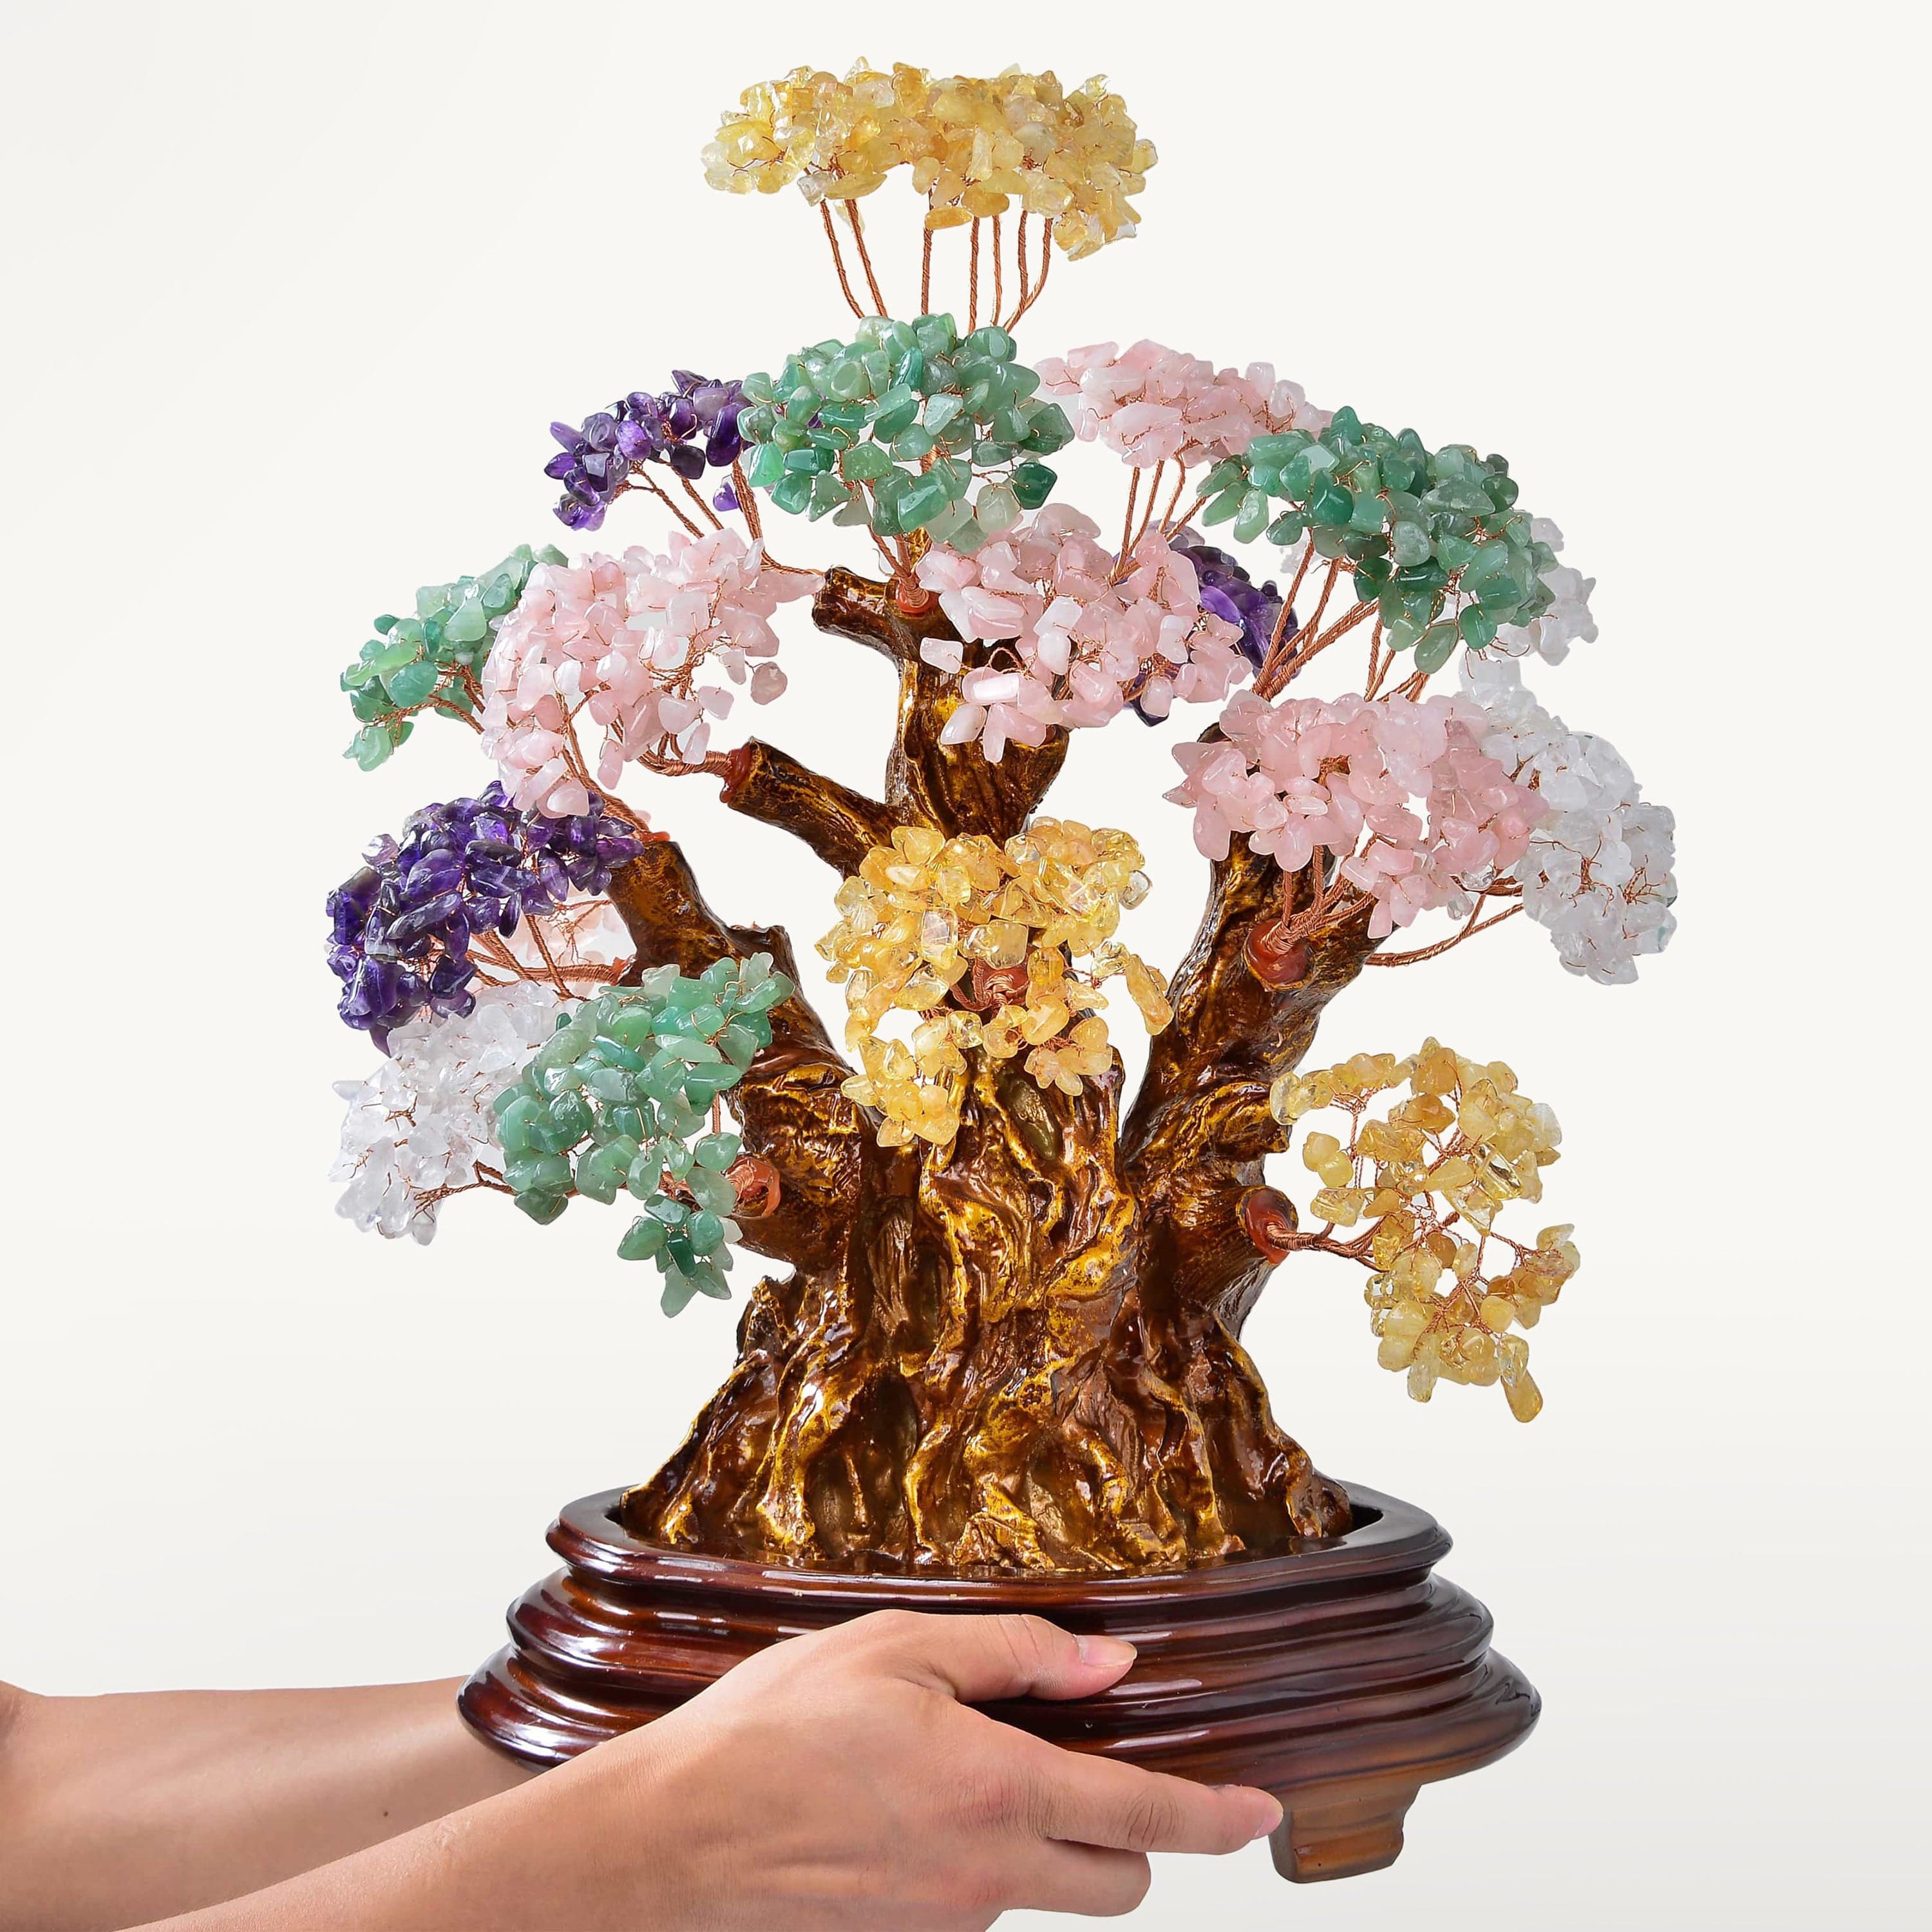 Kalifano Gemstone Trees Multi-Gemstone Tree of Life Centerpiece with over 2,000 Natural Stones K9800-MT